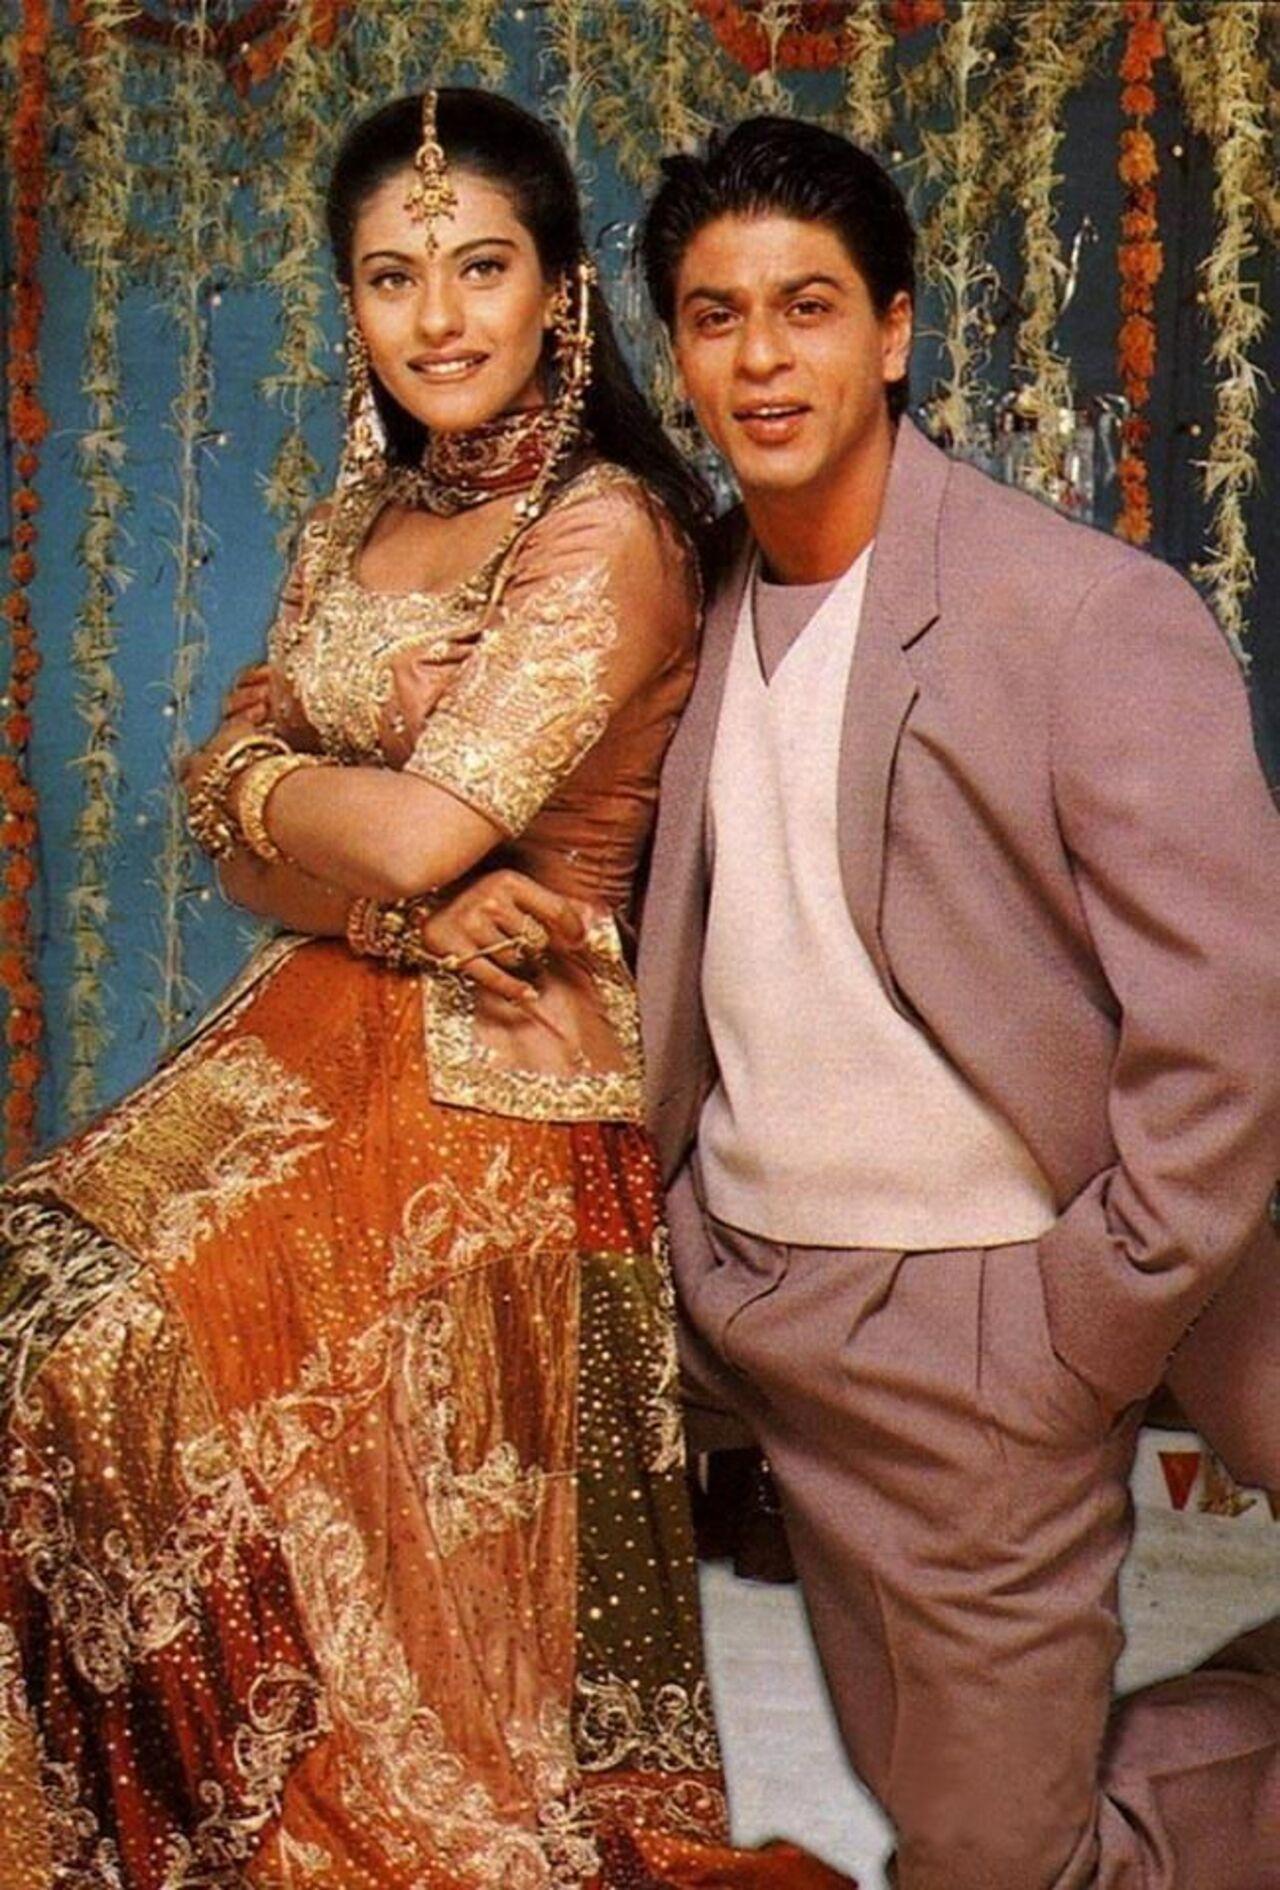 Manish Malhotra had revealed that the lehenga worn by Kajol in the climax scene of Kuch Kuch Hota Hai was inspired by a persian carpet